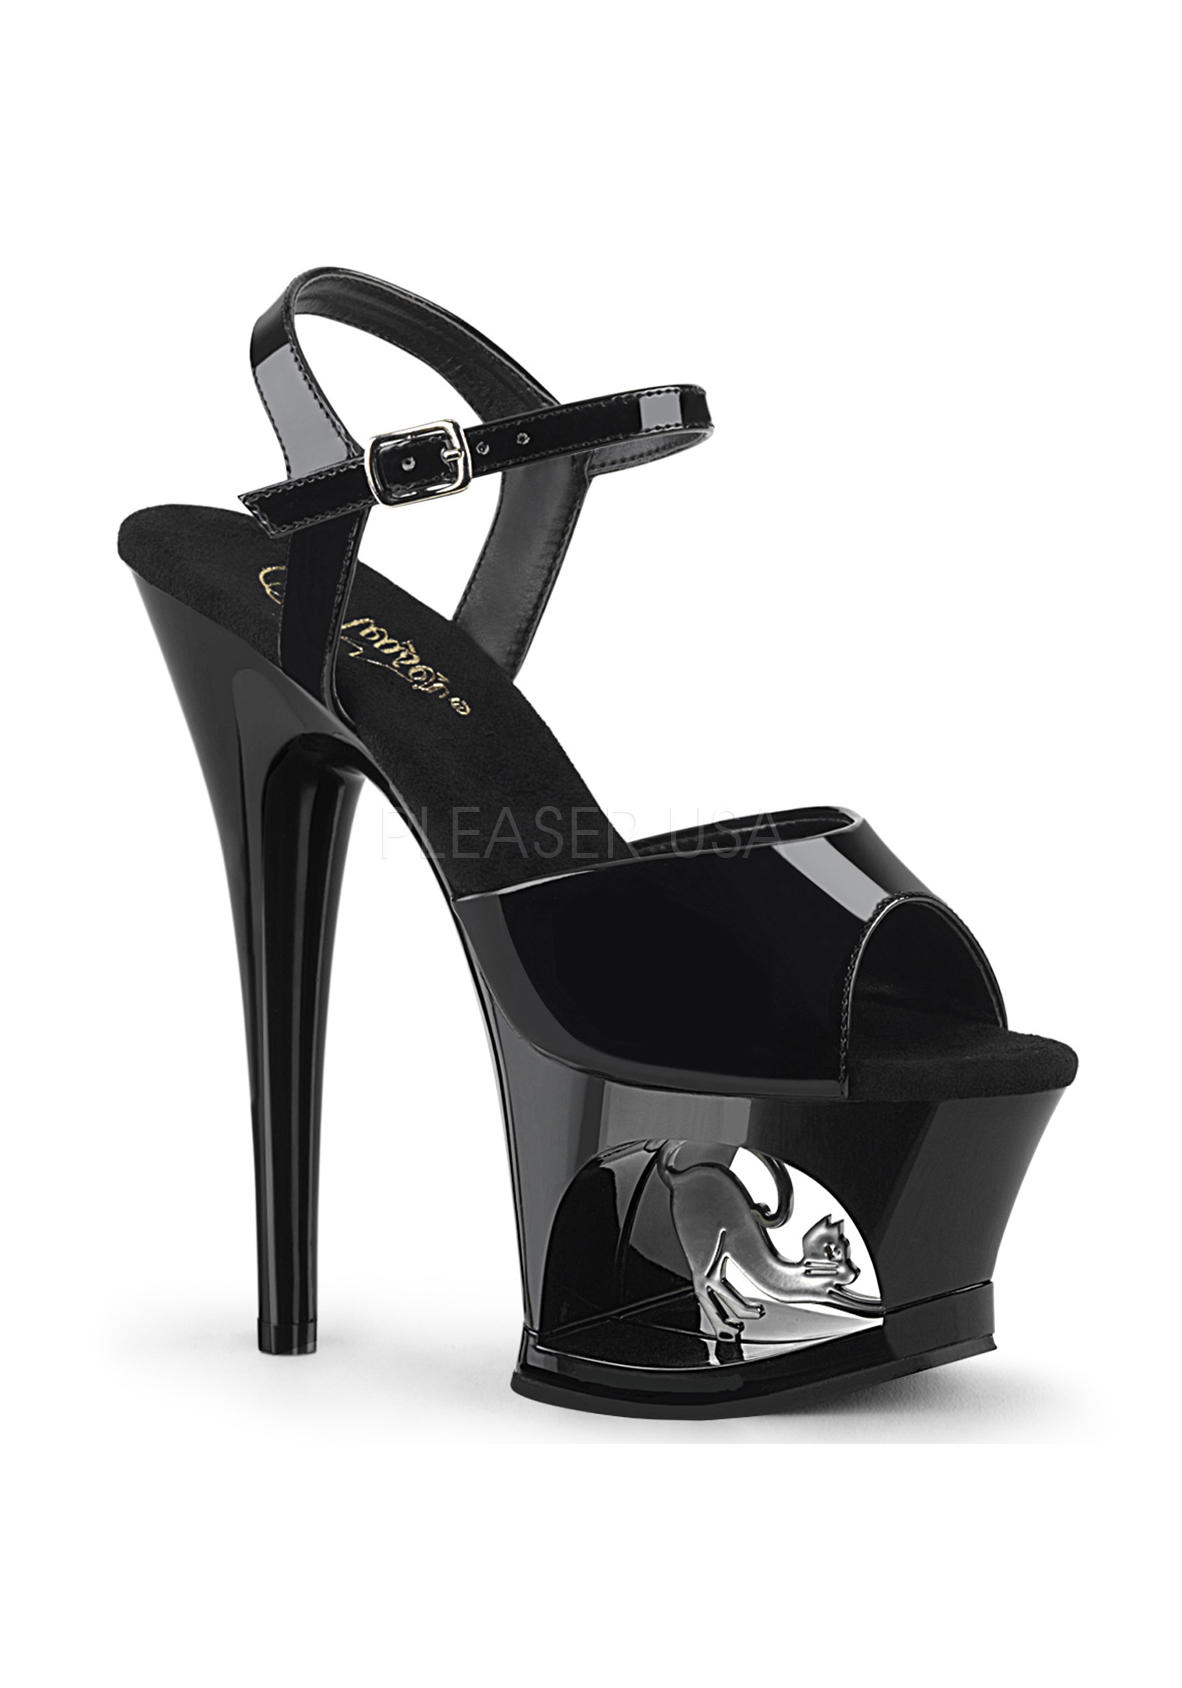 Details about   7 Inch Heel 2 3/4 Inch Platform Corset Style Ankle Strap Sandal 